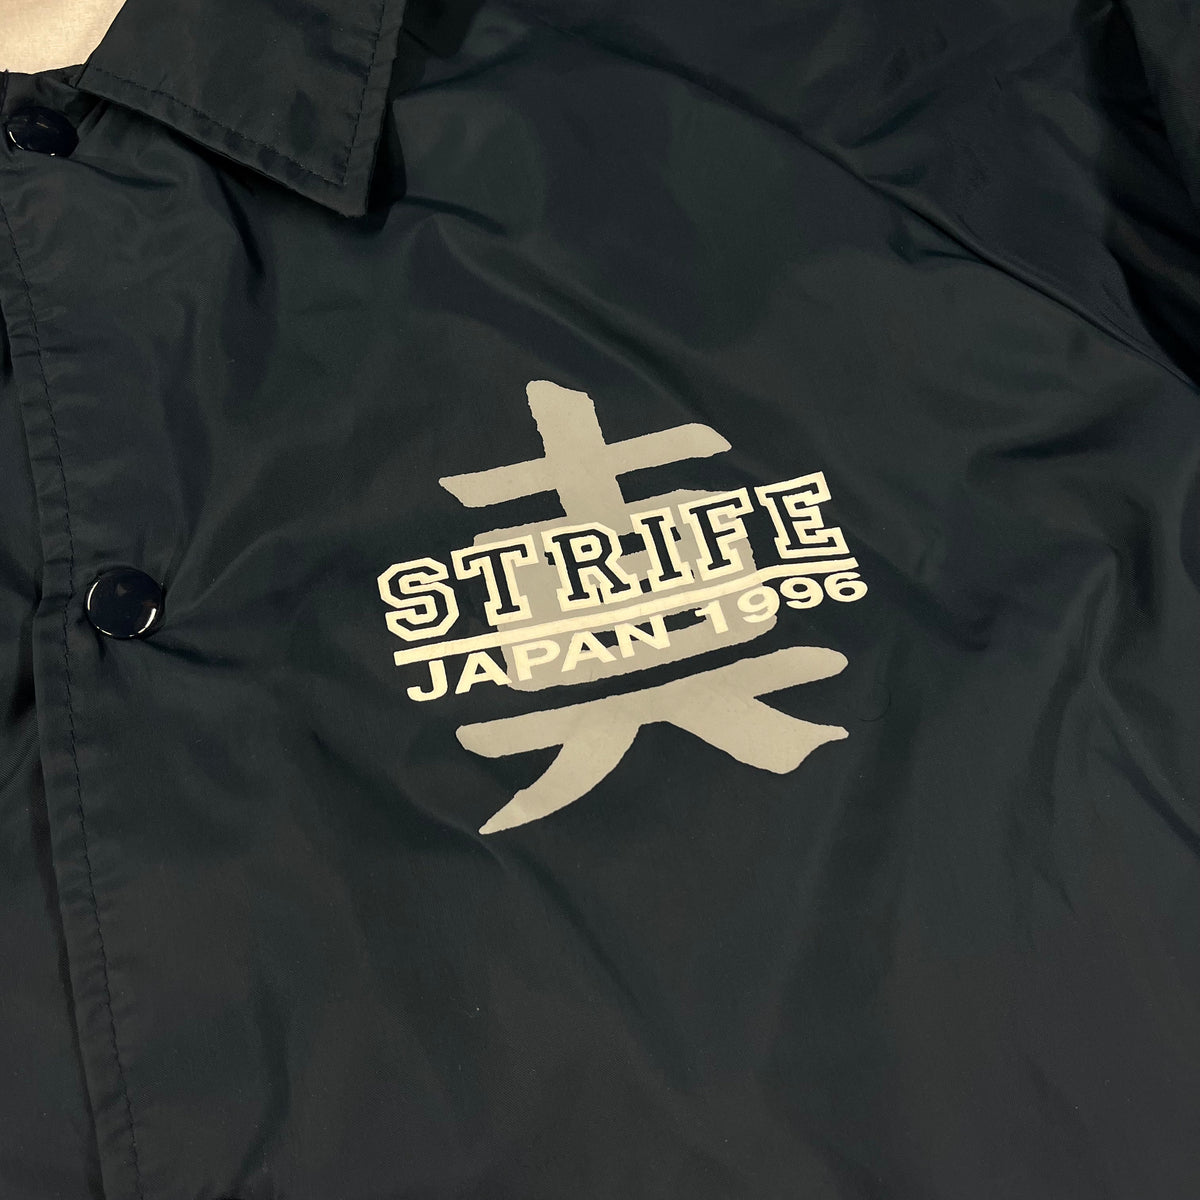 Vintage Strife &quot;In This Defiance&quot; Japan 1996 Windbreaker Jacket